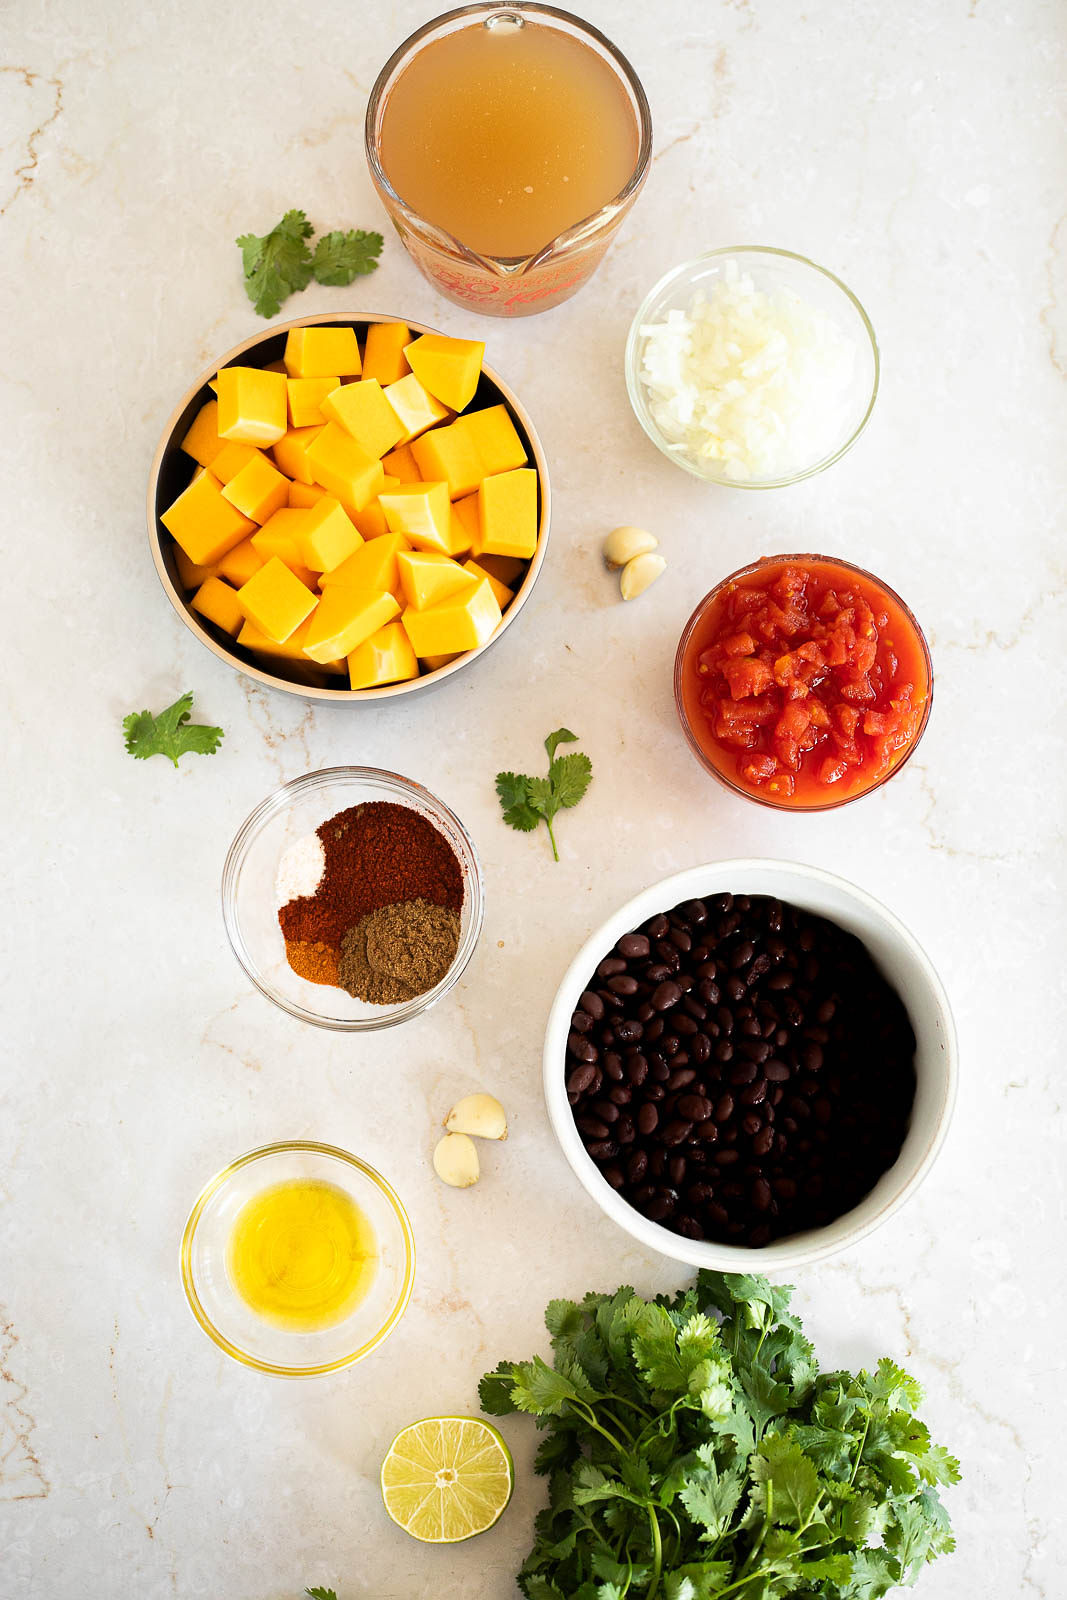 Top view of ingredients for Black Bean and Butternut Squash Chili.